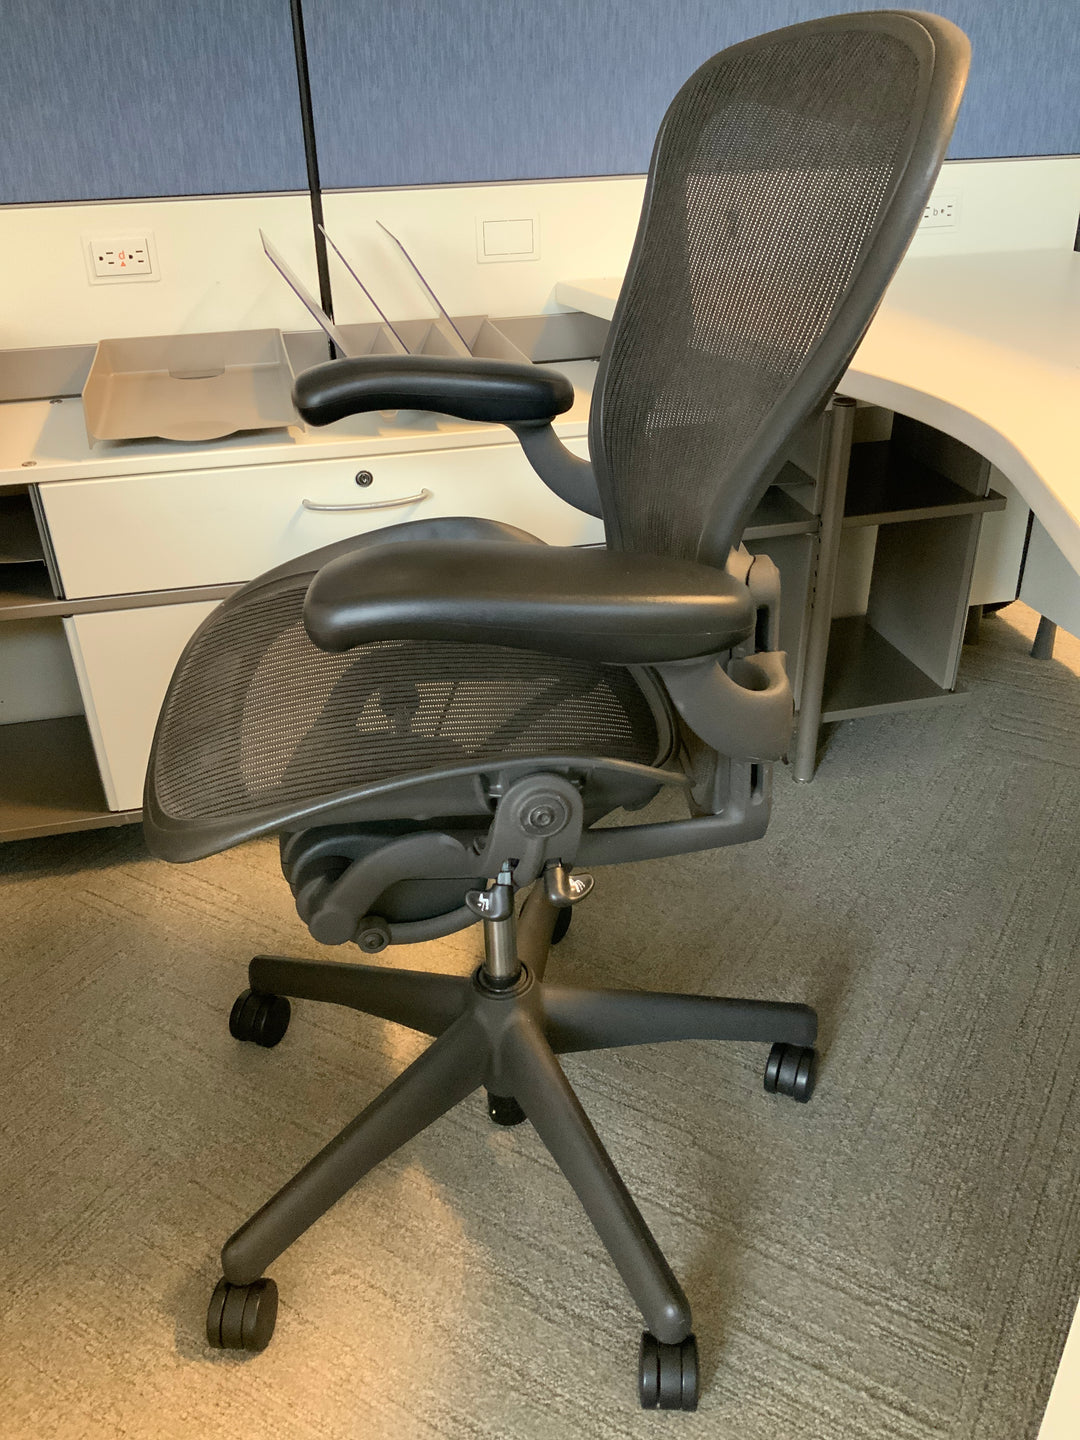 Herman Miller Carbon Aeron Task Chair Size A - Preowned - FOB Vernon Hills, IL (Min Purchase Qty = 20)